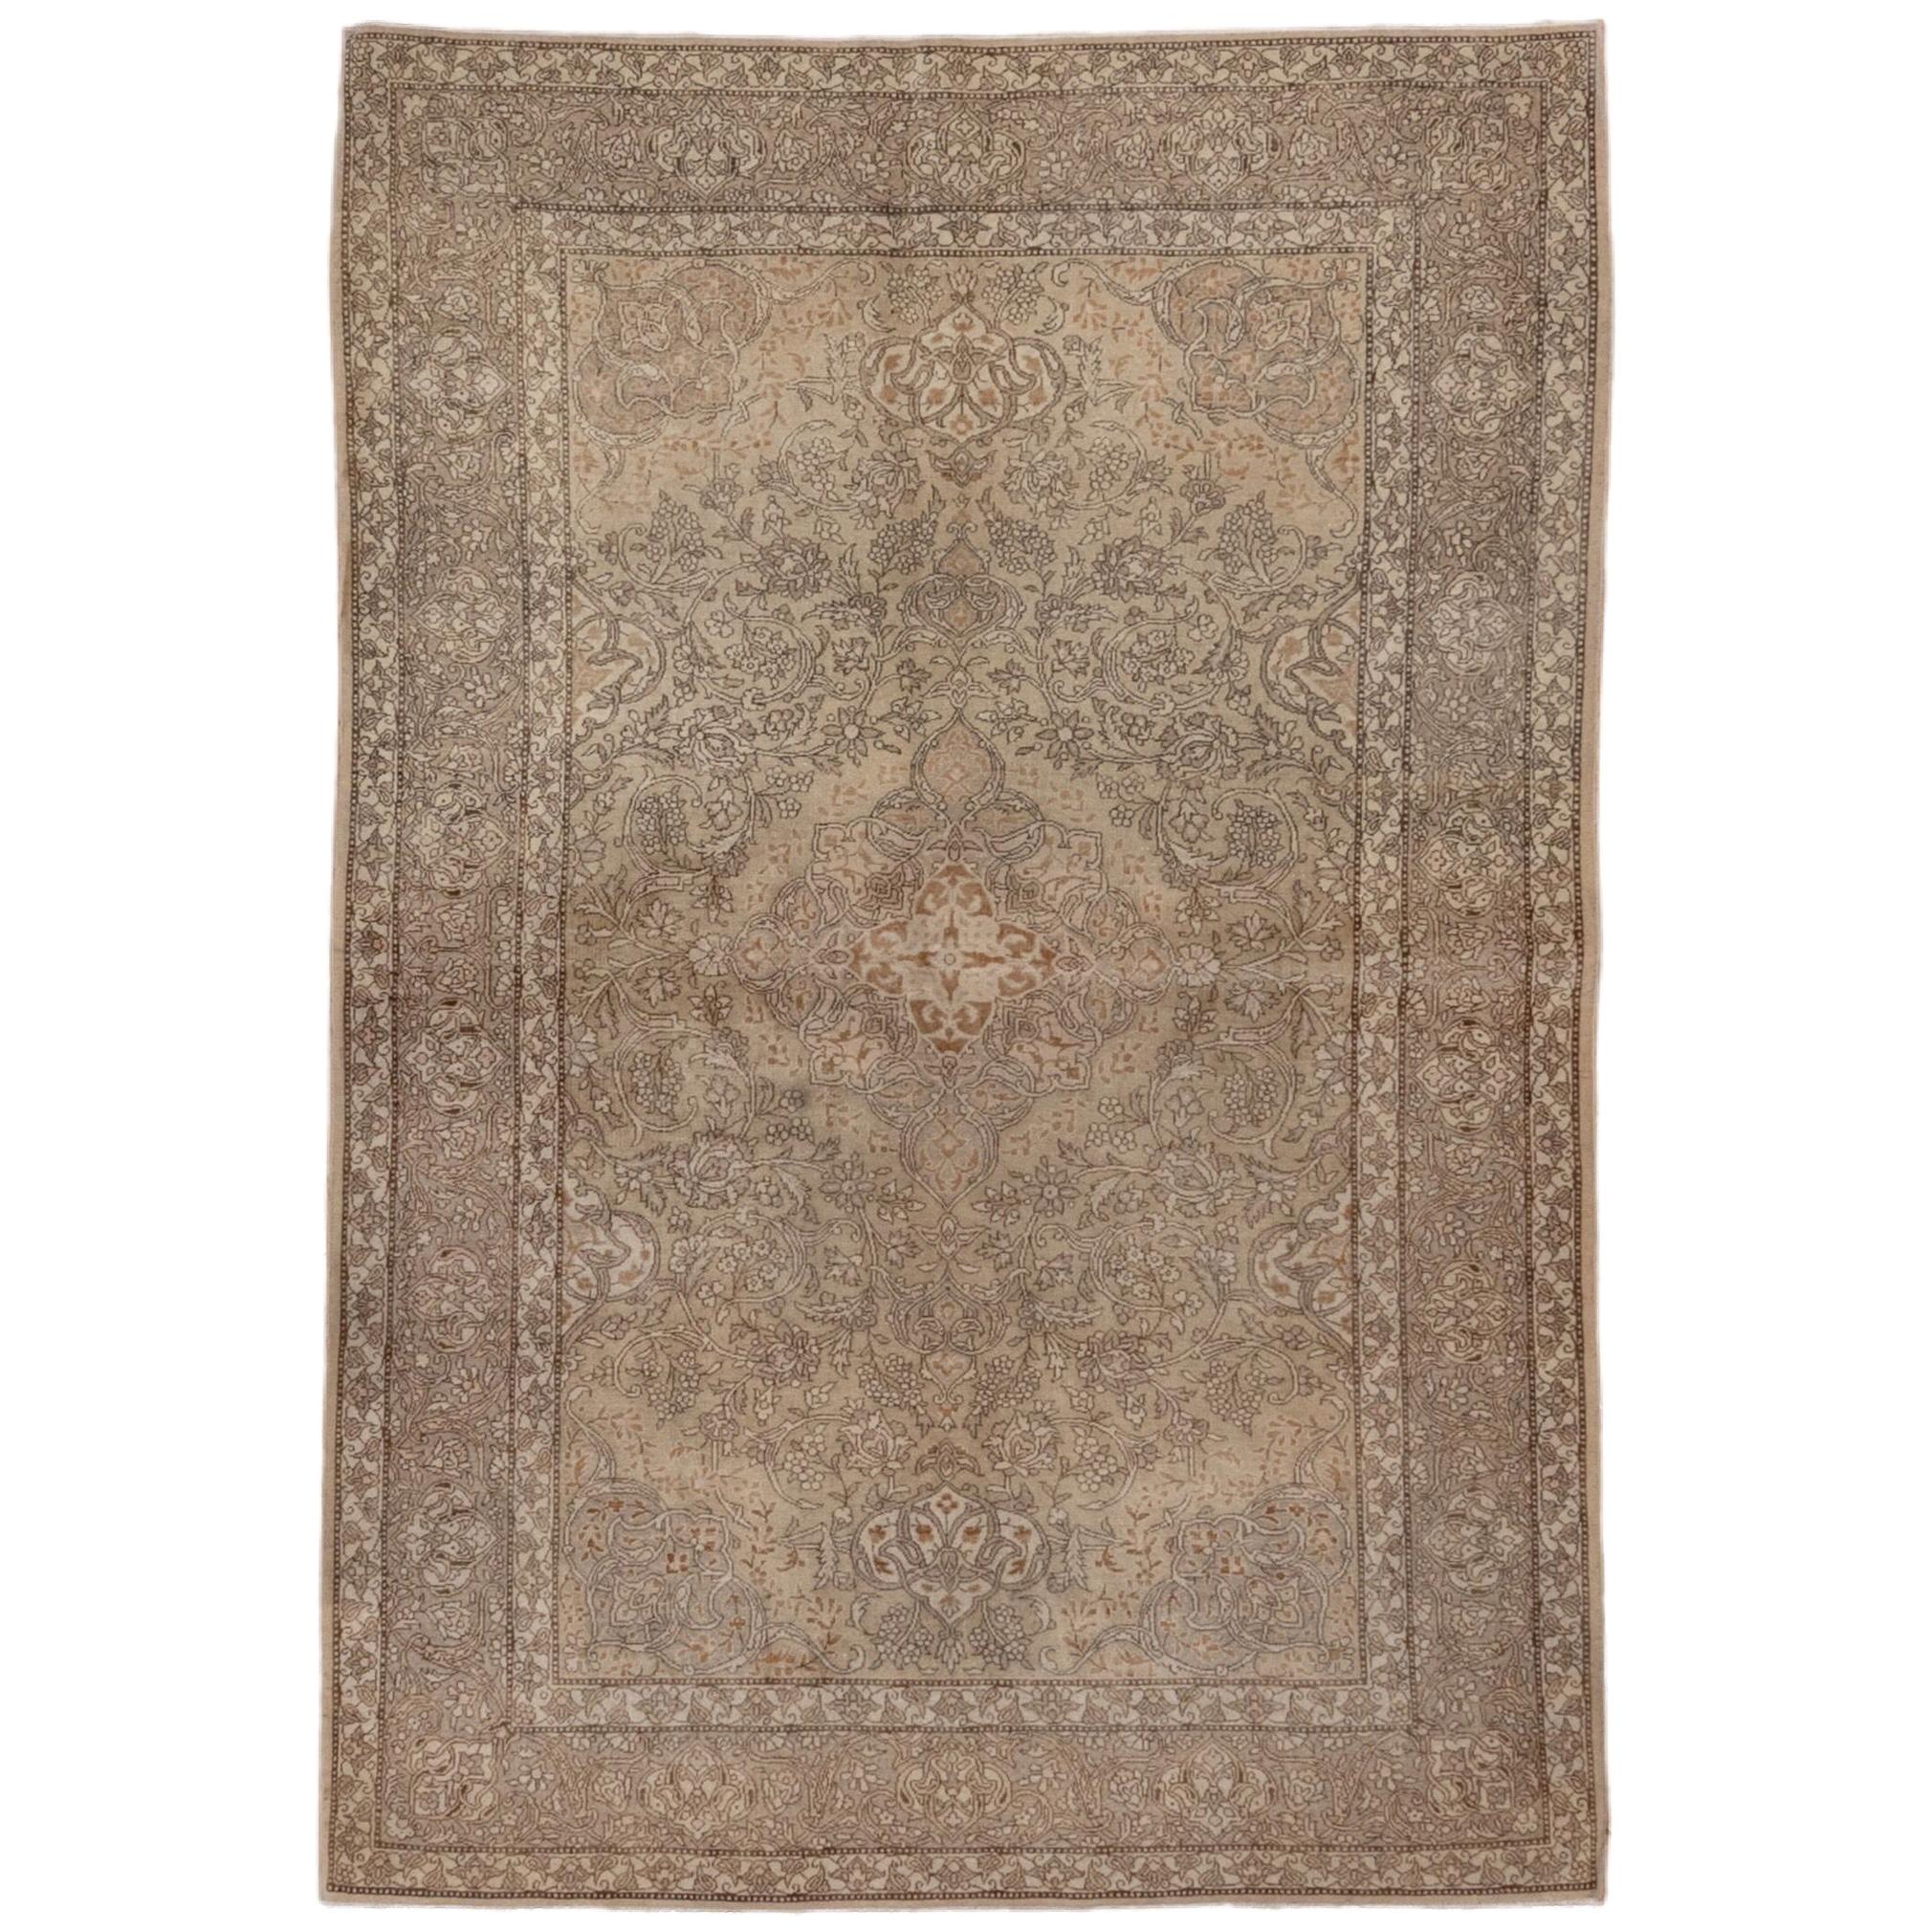 Tone on Tone Antique Persian Kashan Scatter Rug, Circa 1940s